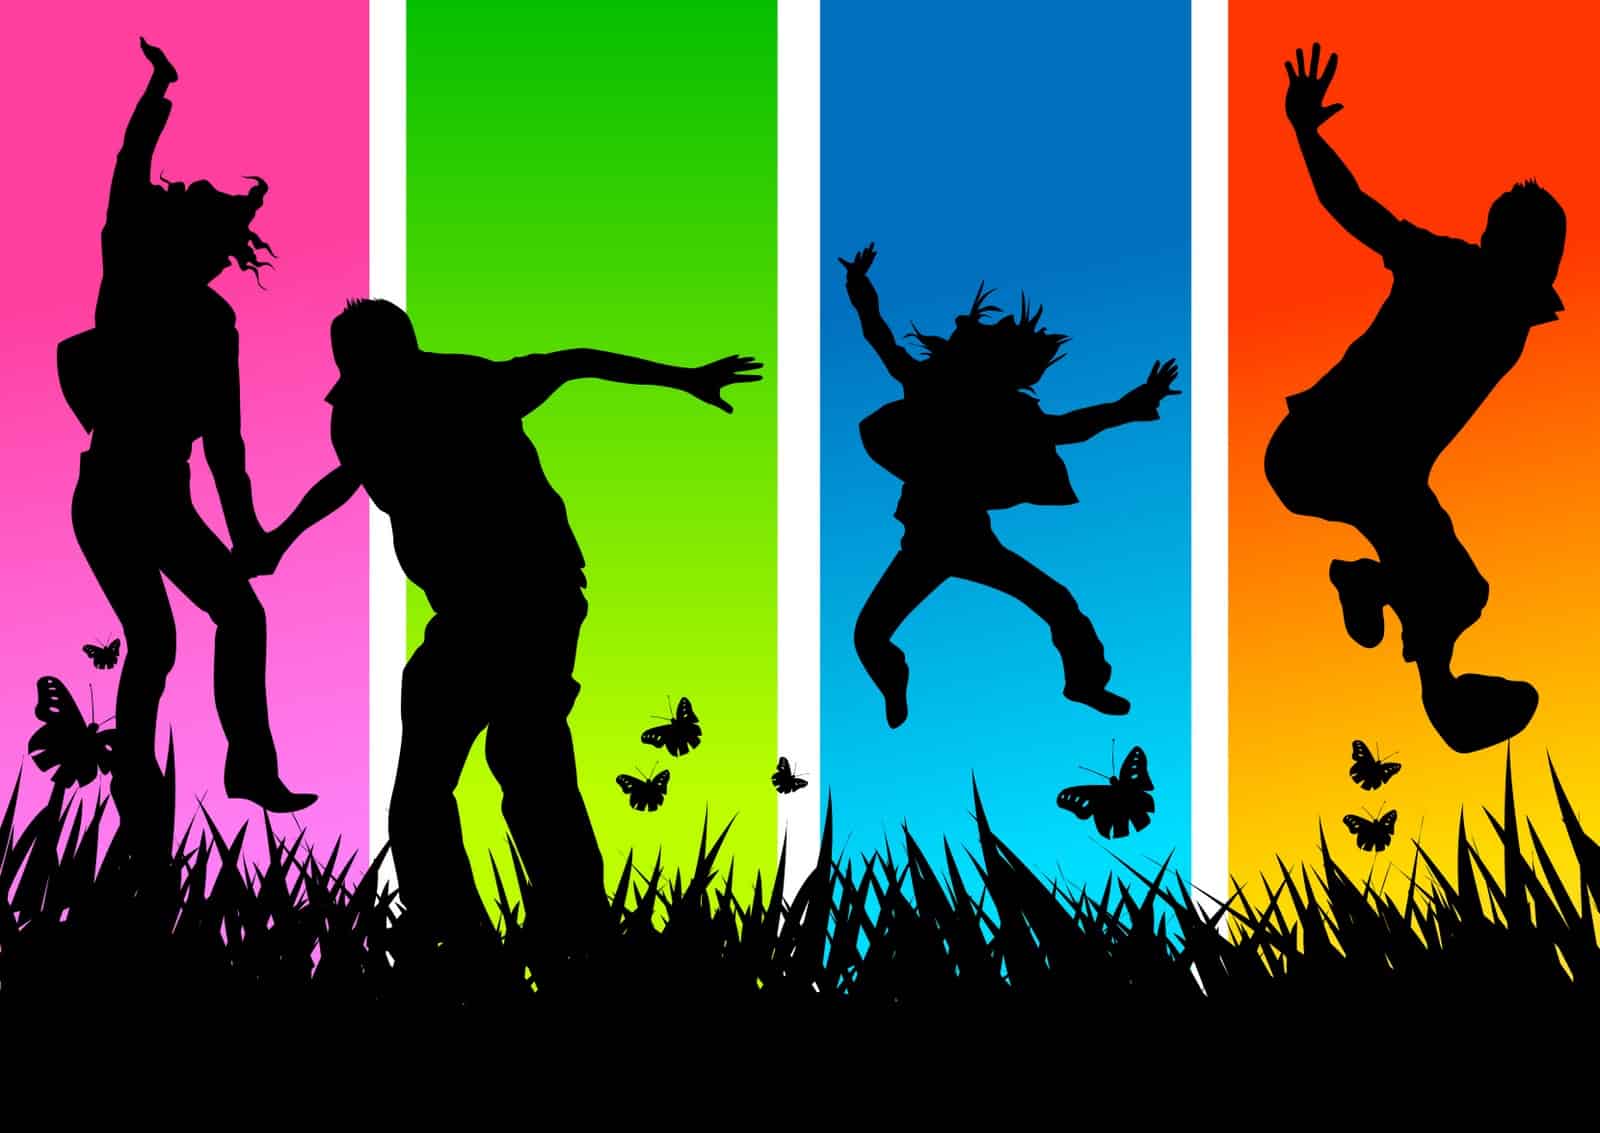 People jumping in silhouette in a grassy field with butterflies in front of a colorful background